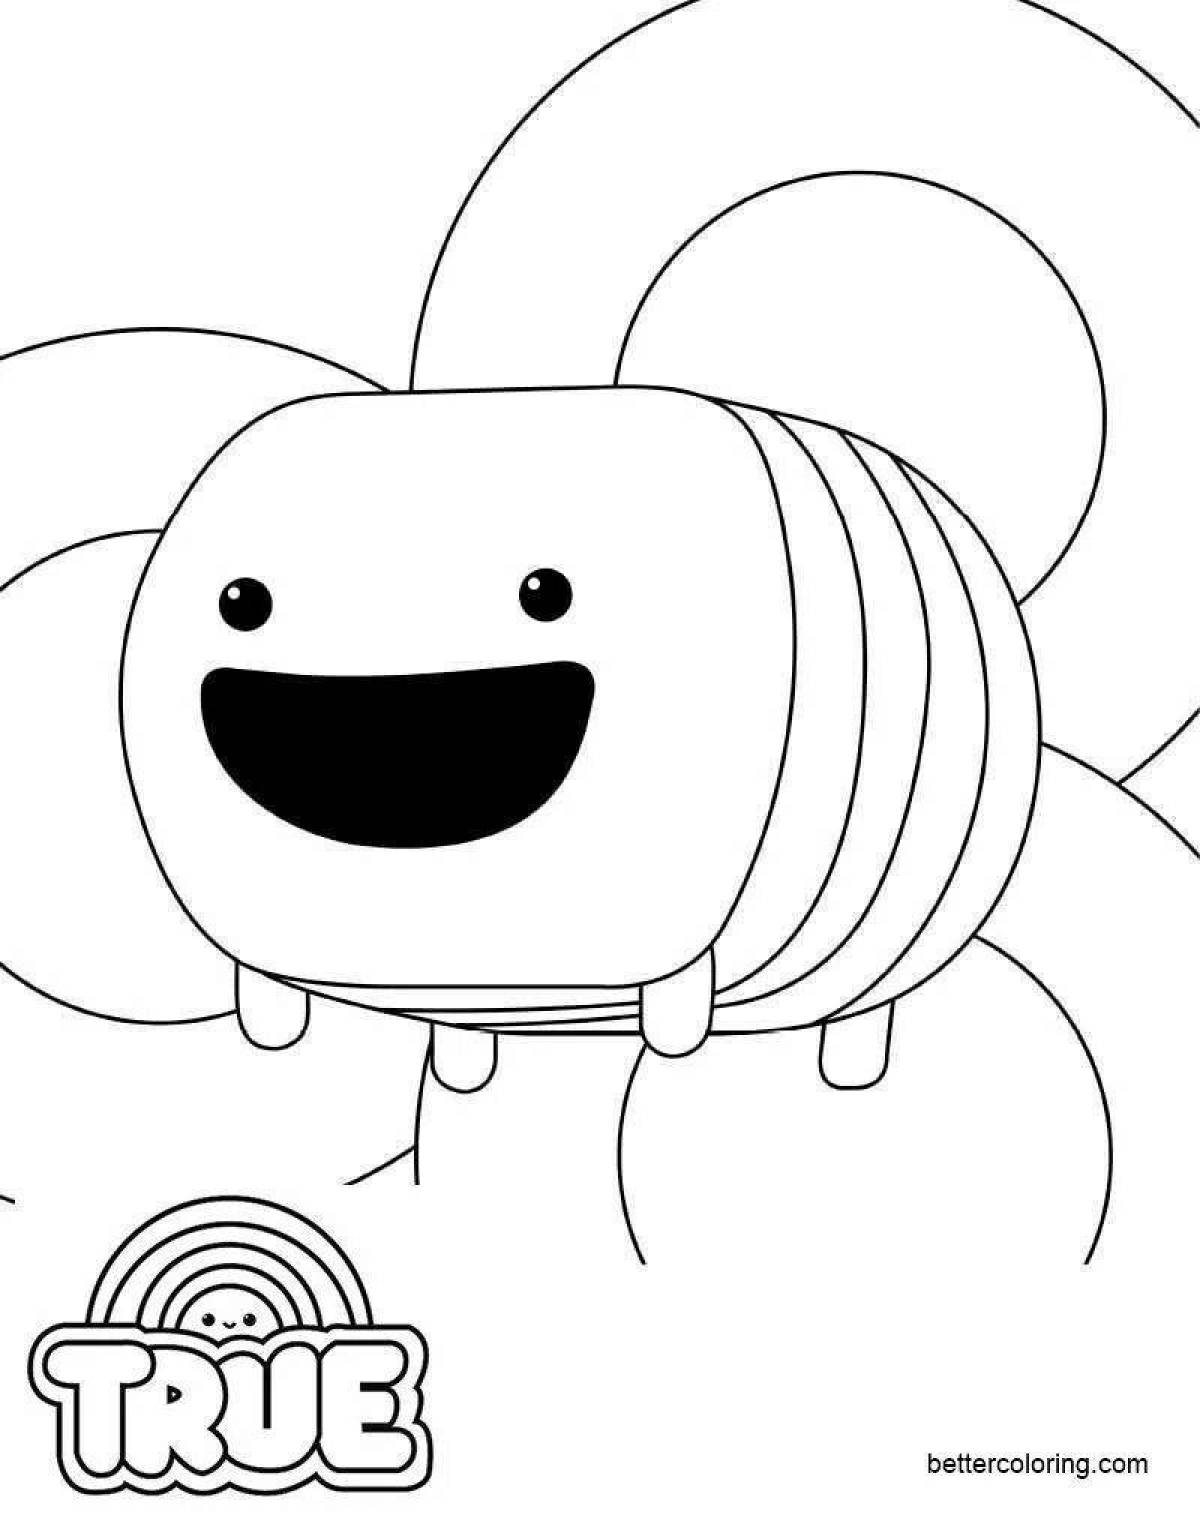 Awesome rainbow kingdom coloring page